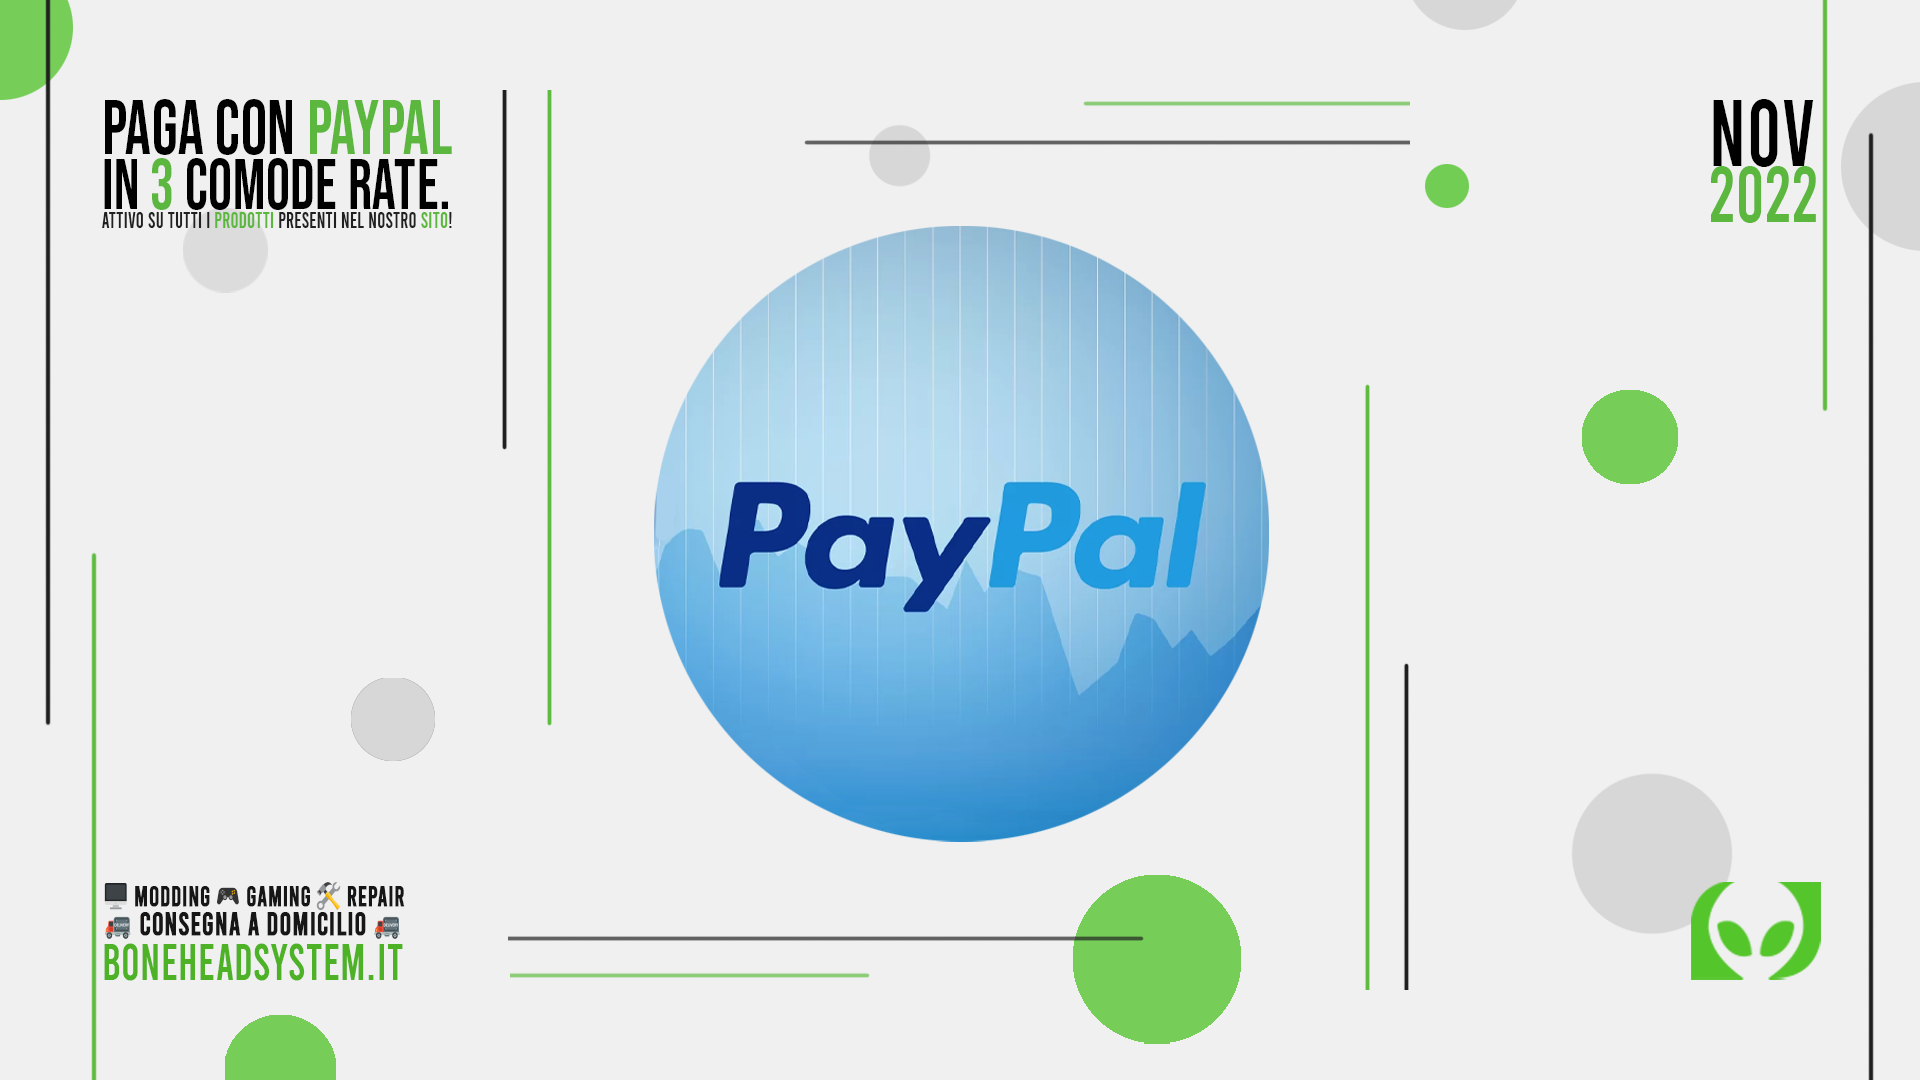 👽 Info – Paga con PayPal in 3 comode rate 👽